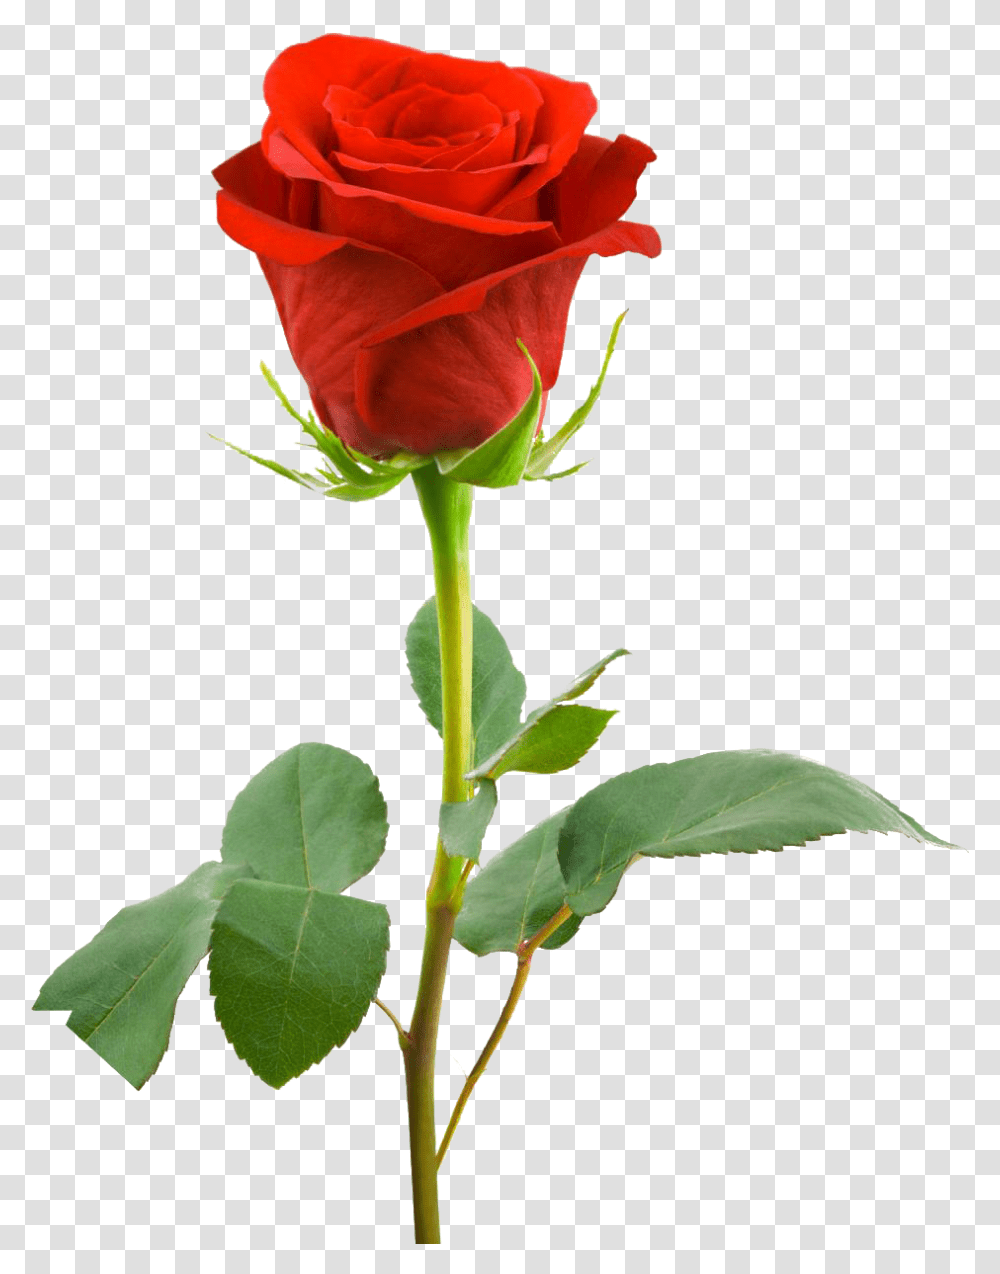 Red Rose Full Hd, Flower, Plant, Blossom Transparent Png